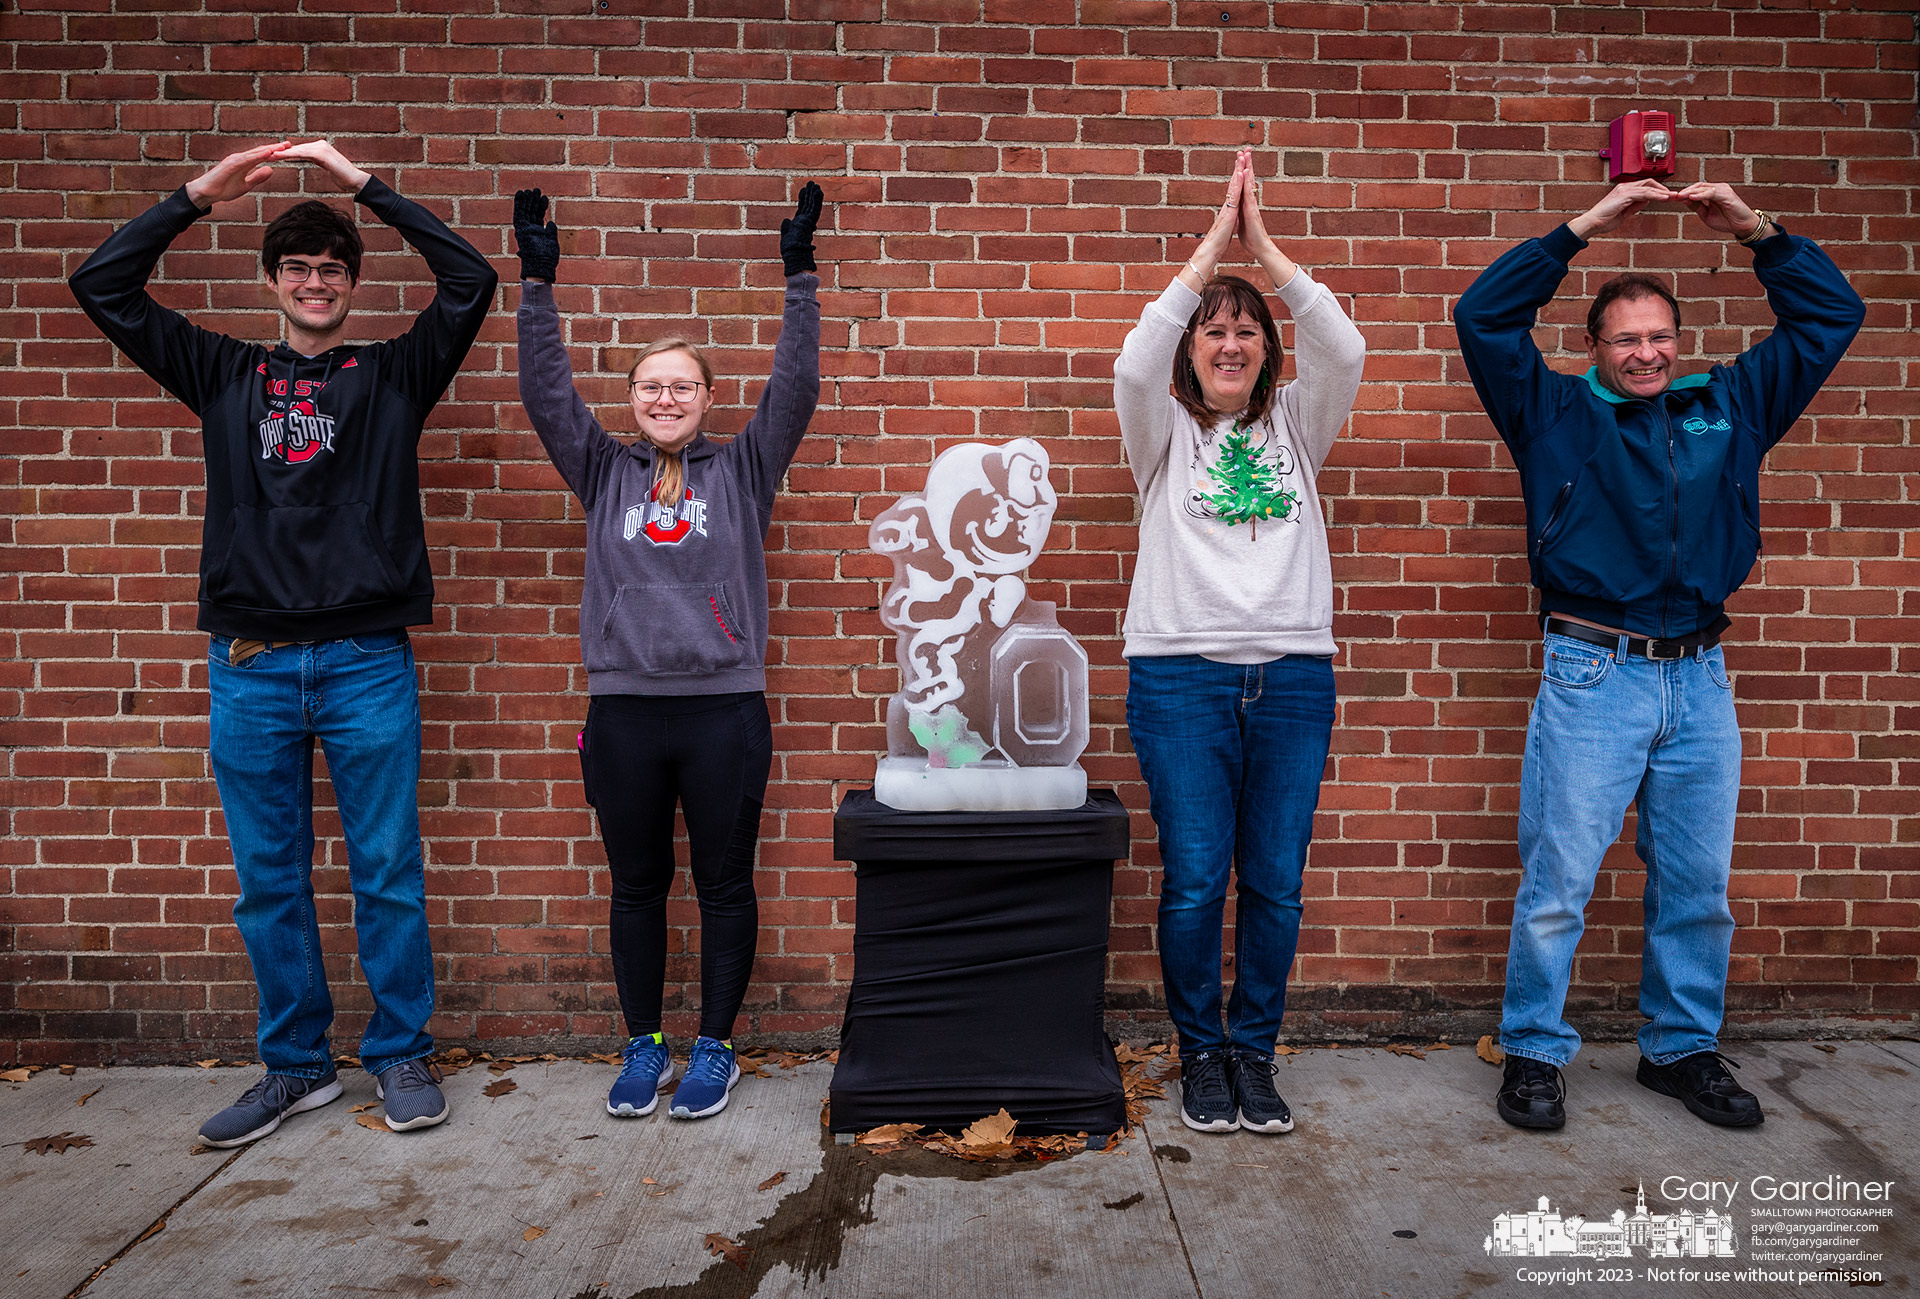 A family makes an extra effort to add to the Christmas cheer with a little Buckeye spirit as they pose for an O-H-I-O photo at the Brutus Buckeye ice sculpture at Jimmy V's in Uptown Westerville. My Final Photo for December 16, 2023.